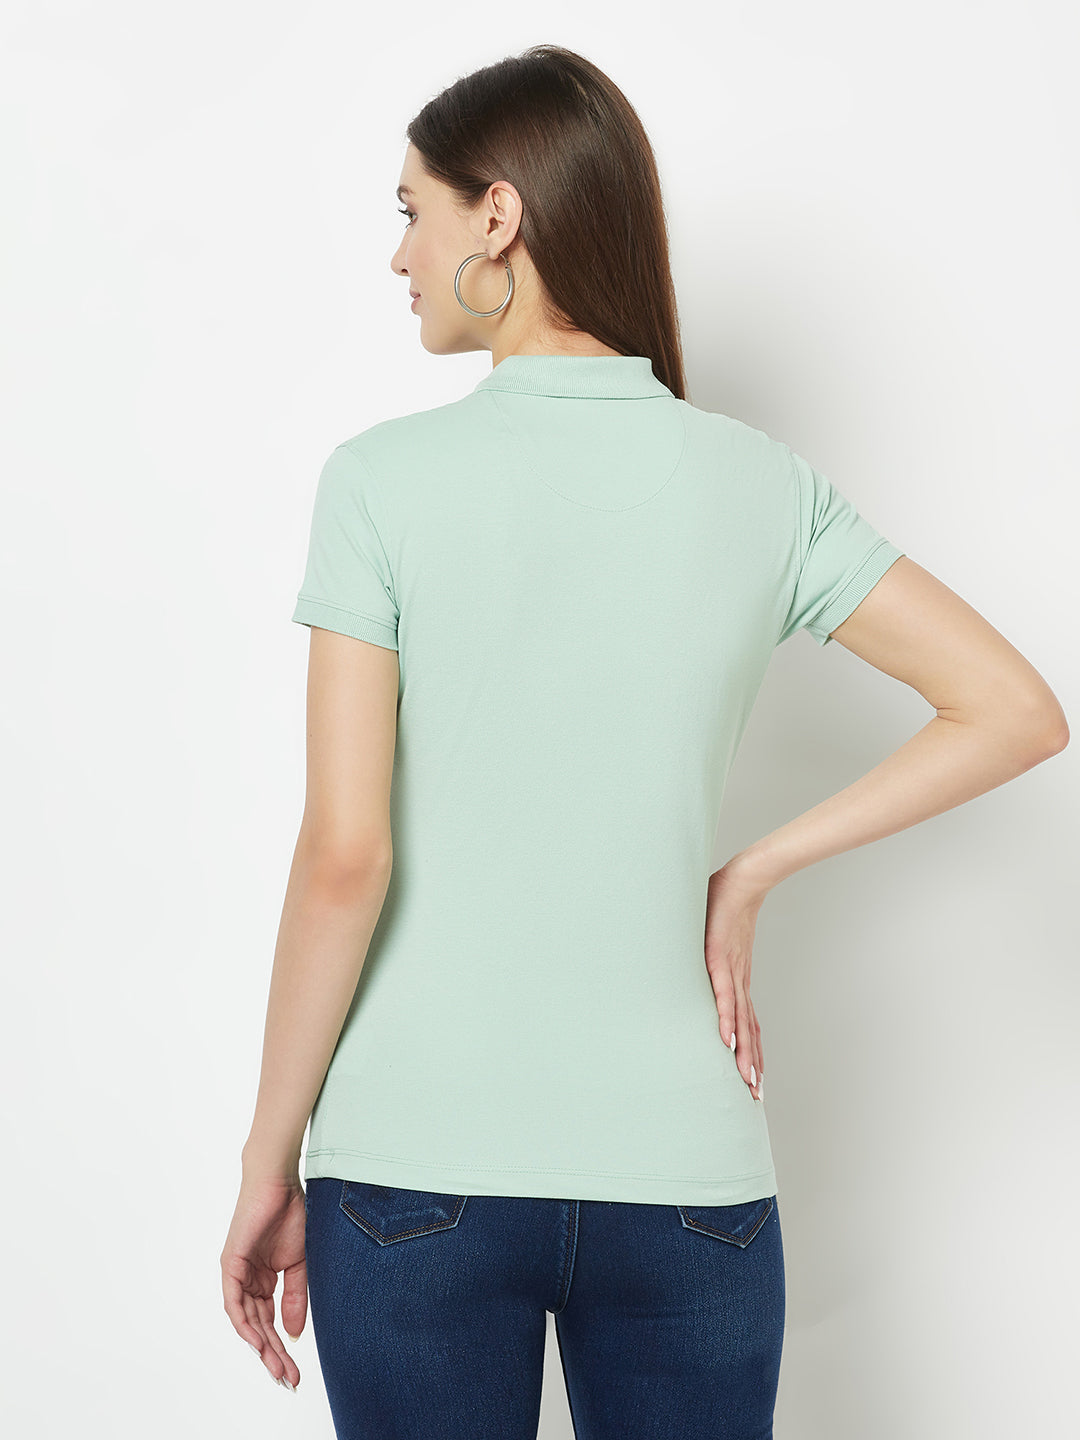  Mint Green Fitted Polo T-Shirt